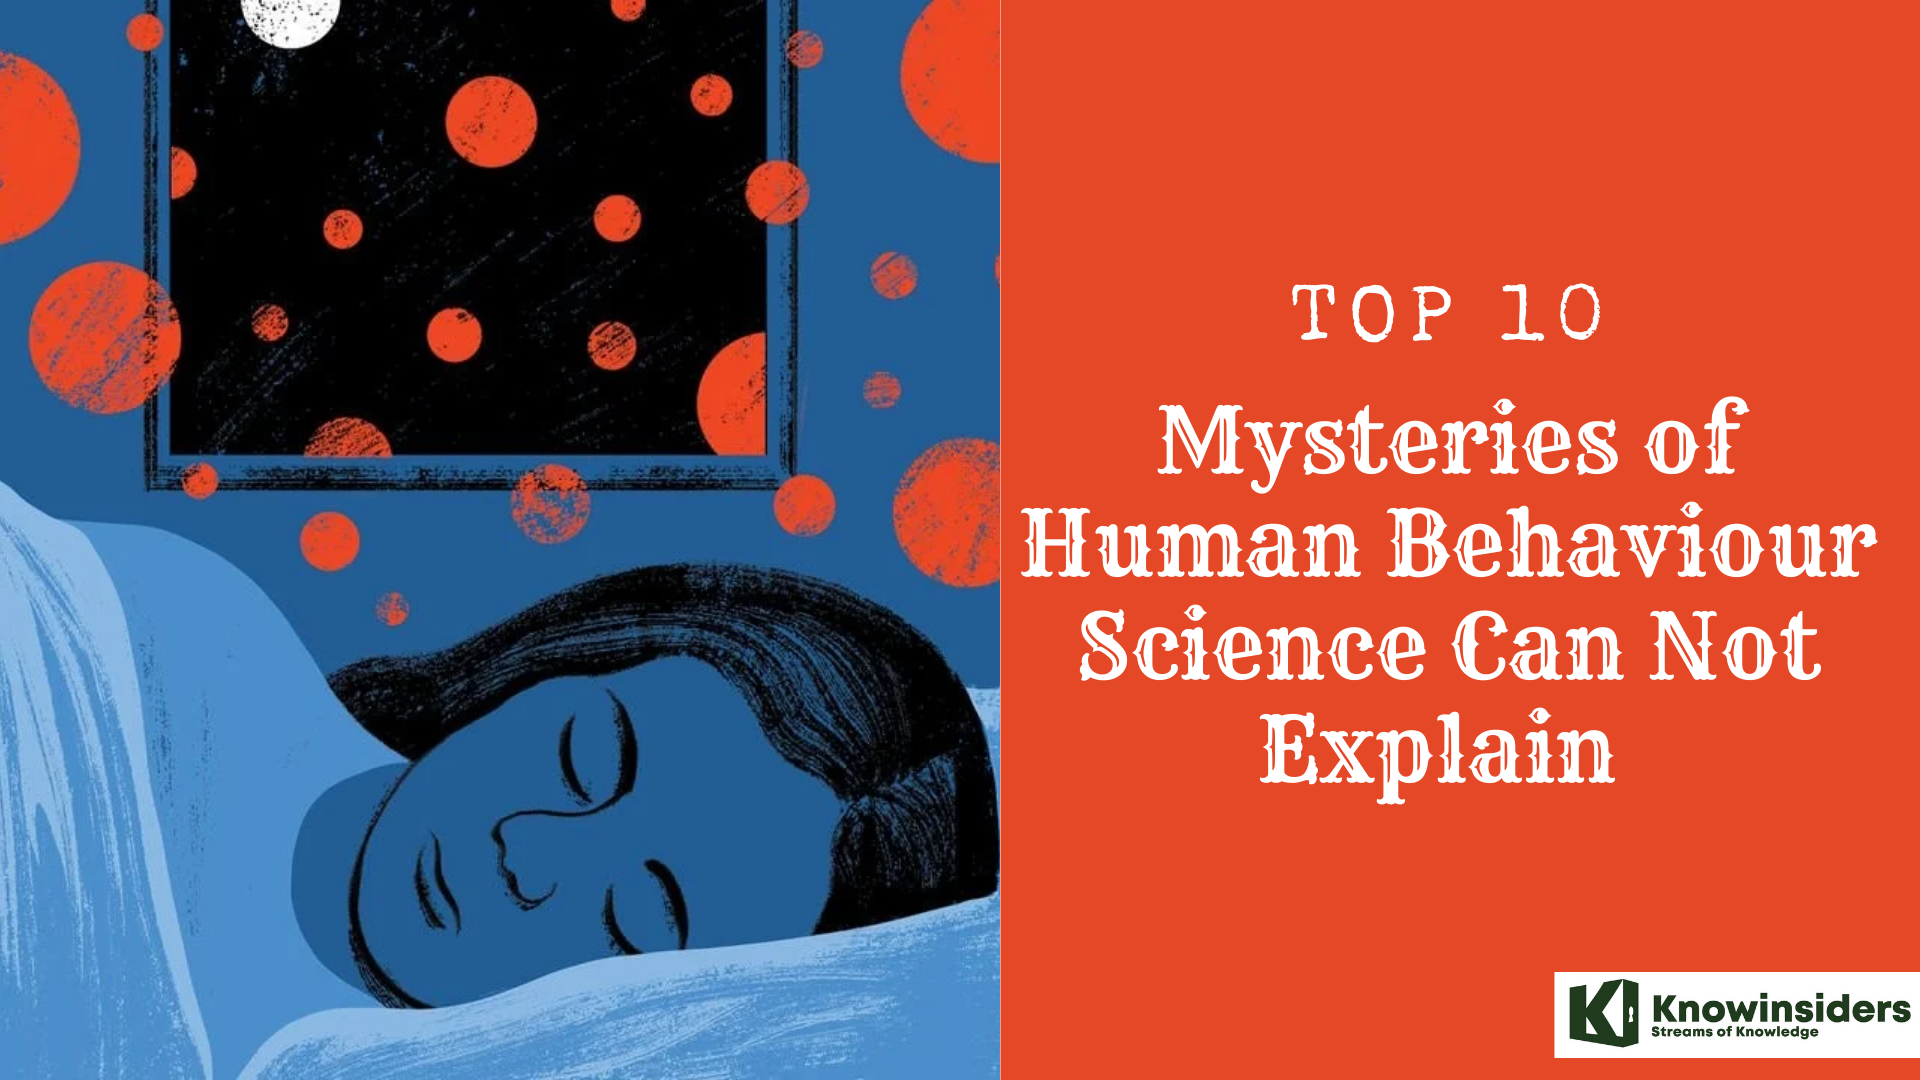 10 Mysteries of Human Behaviour That Science Fails to Explain